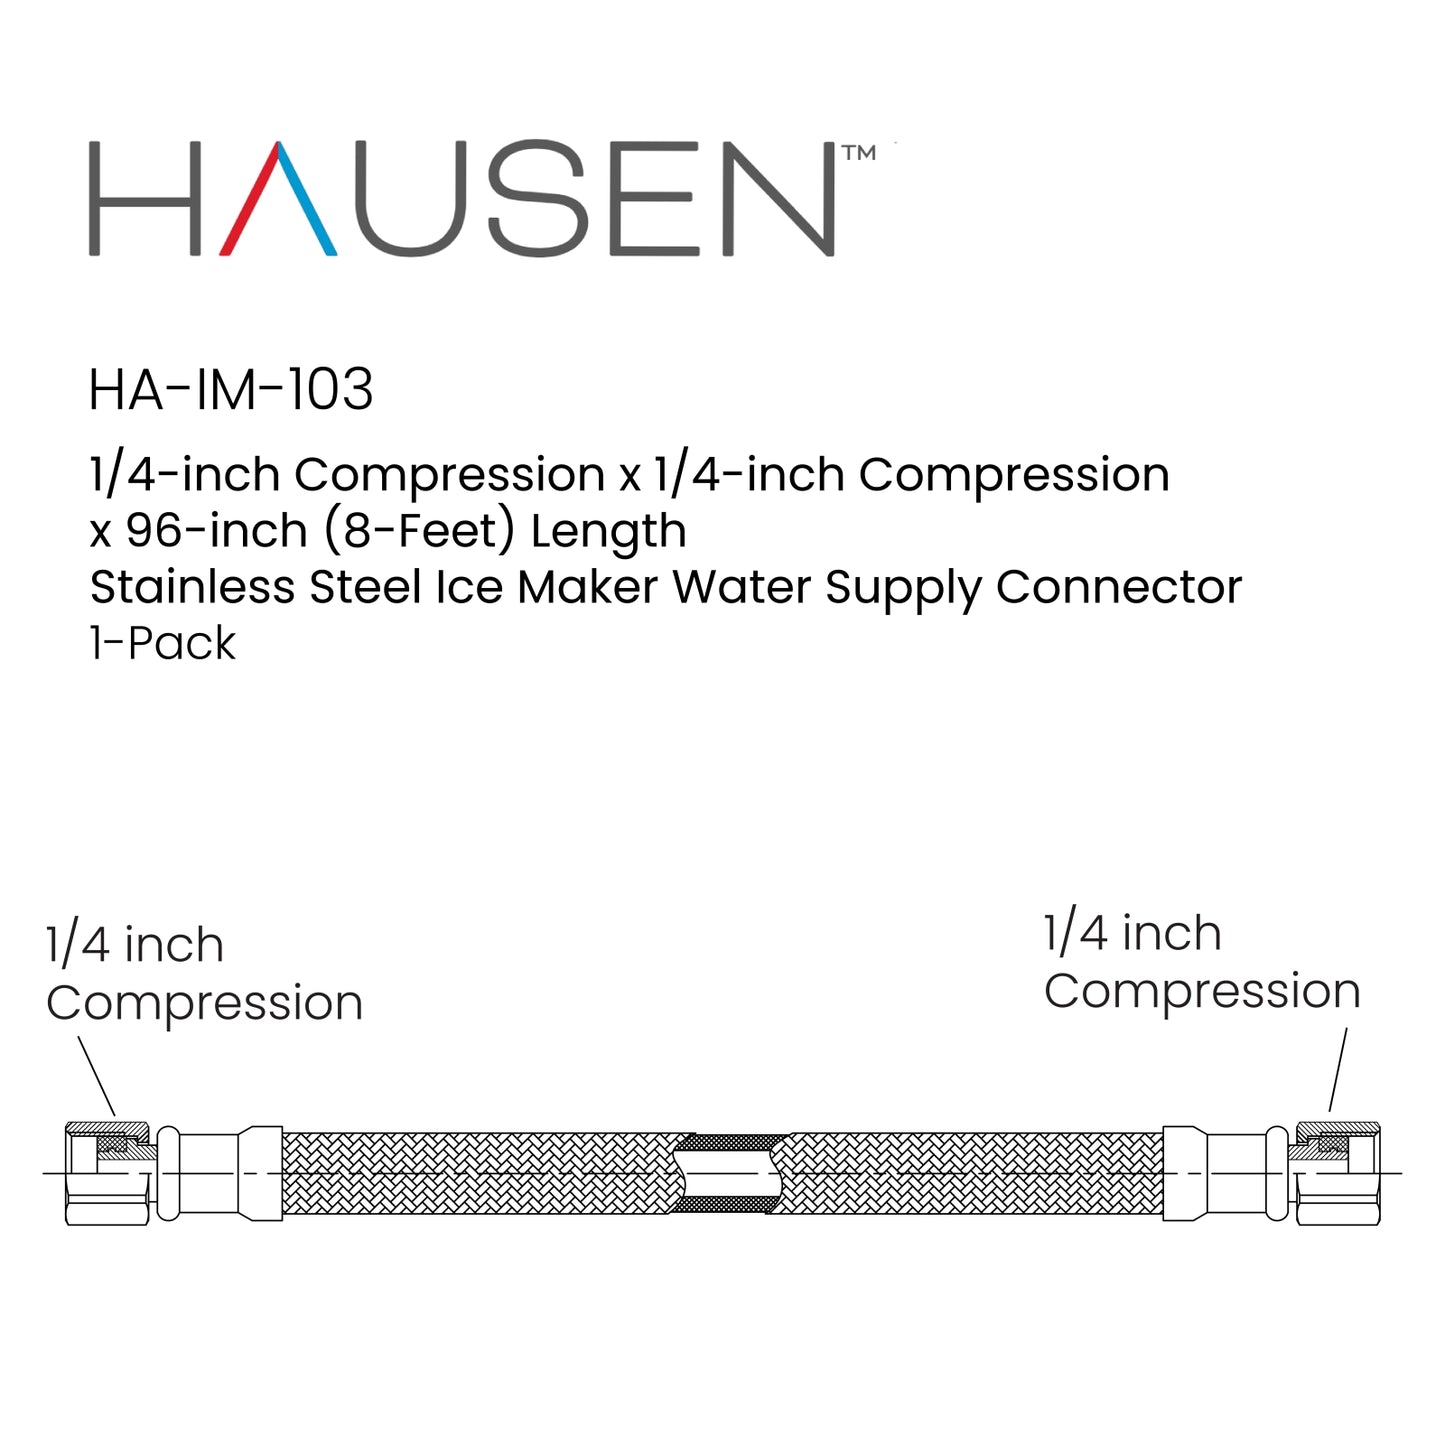 Hausen 1/4-inch Compression x 1/4-inch Compression x 96-inch (8-Feet) Length Stainless Steel Ice Maker Water Supply Connector; Lead Free; Compatible with Standard Refrigerators, 1-Pack